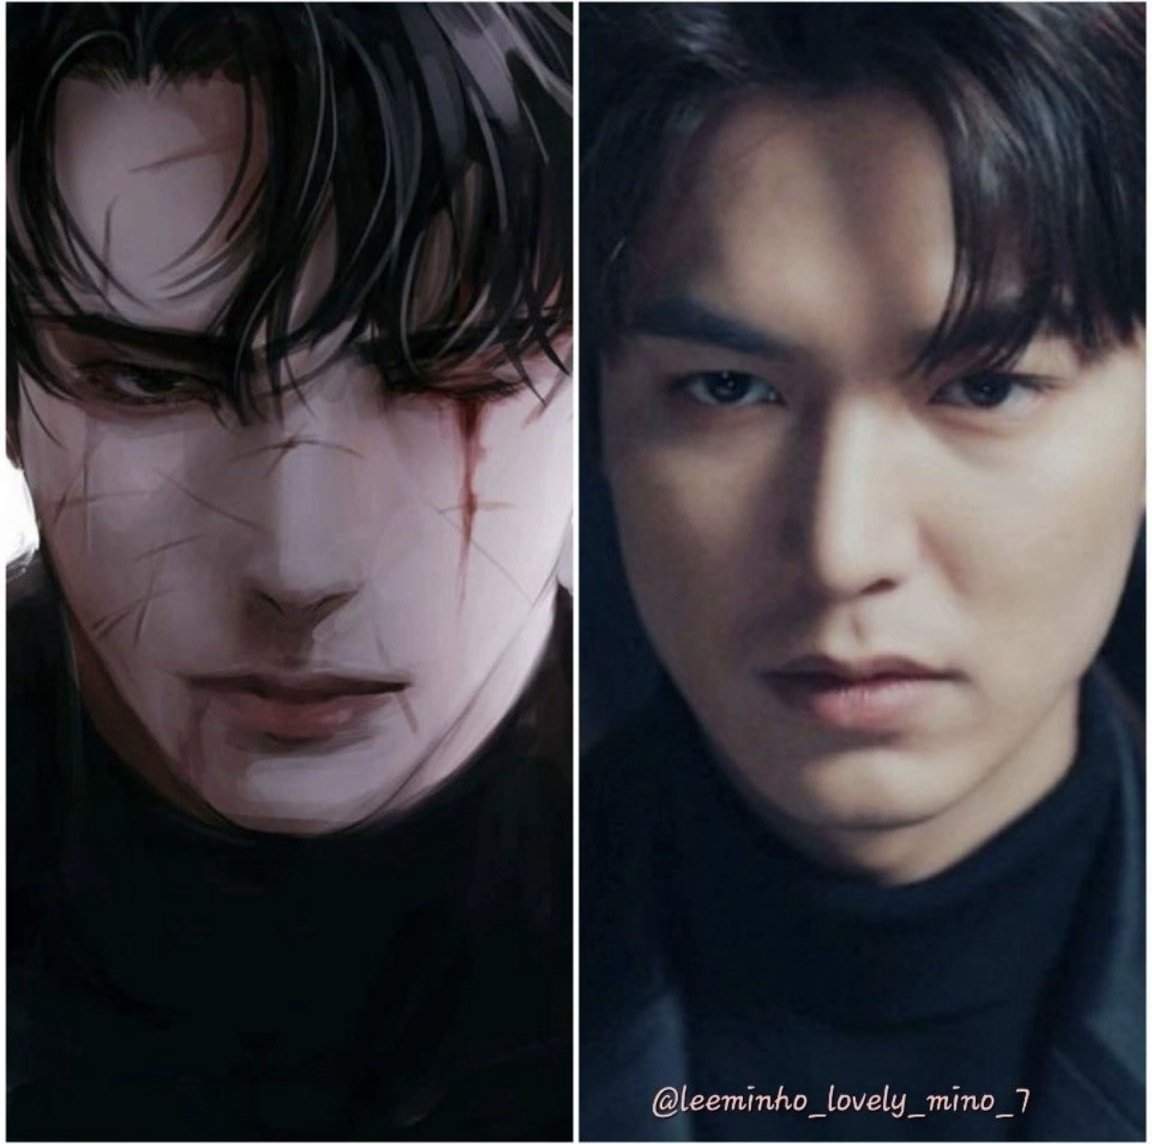 #LeeMinho devour every roles he took before and will continue to slay that's for sure👐...
im now waiting for him to confirm this one🥰

#LeeMinhoxYJH